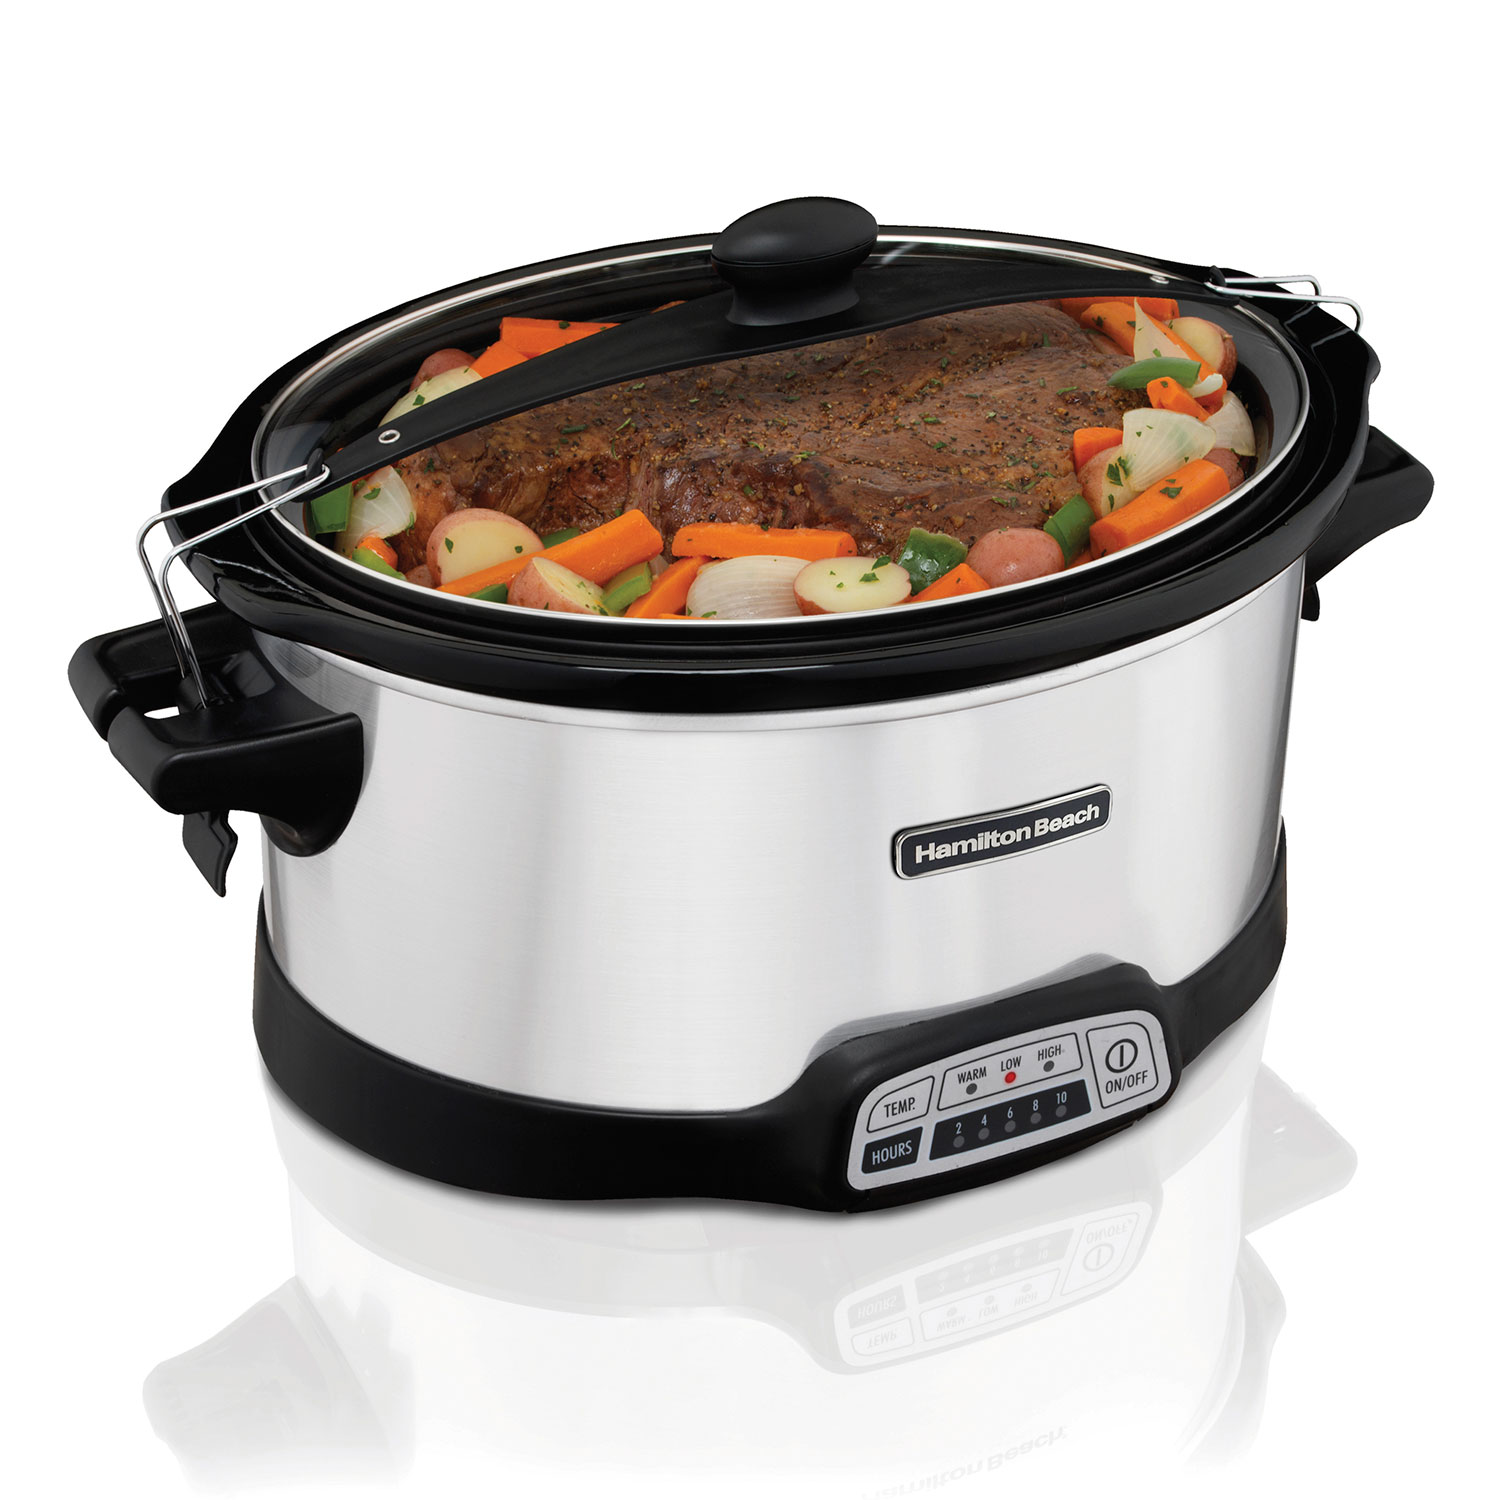 Stay or Go® Programmable Slow Cooker, Silver (33576F)